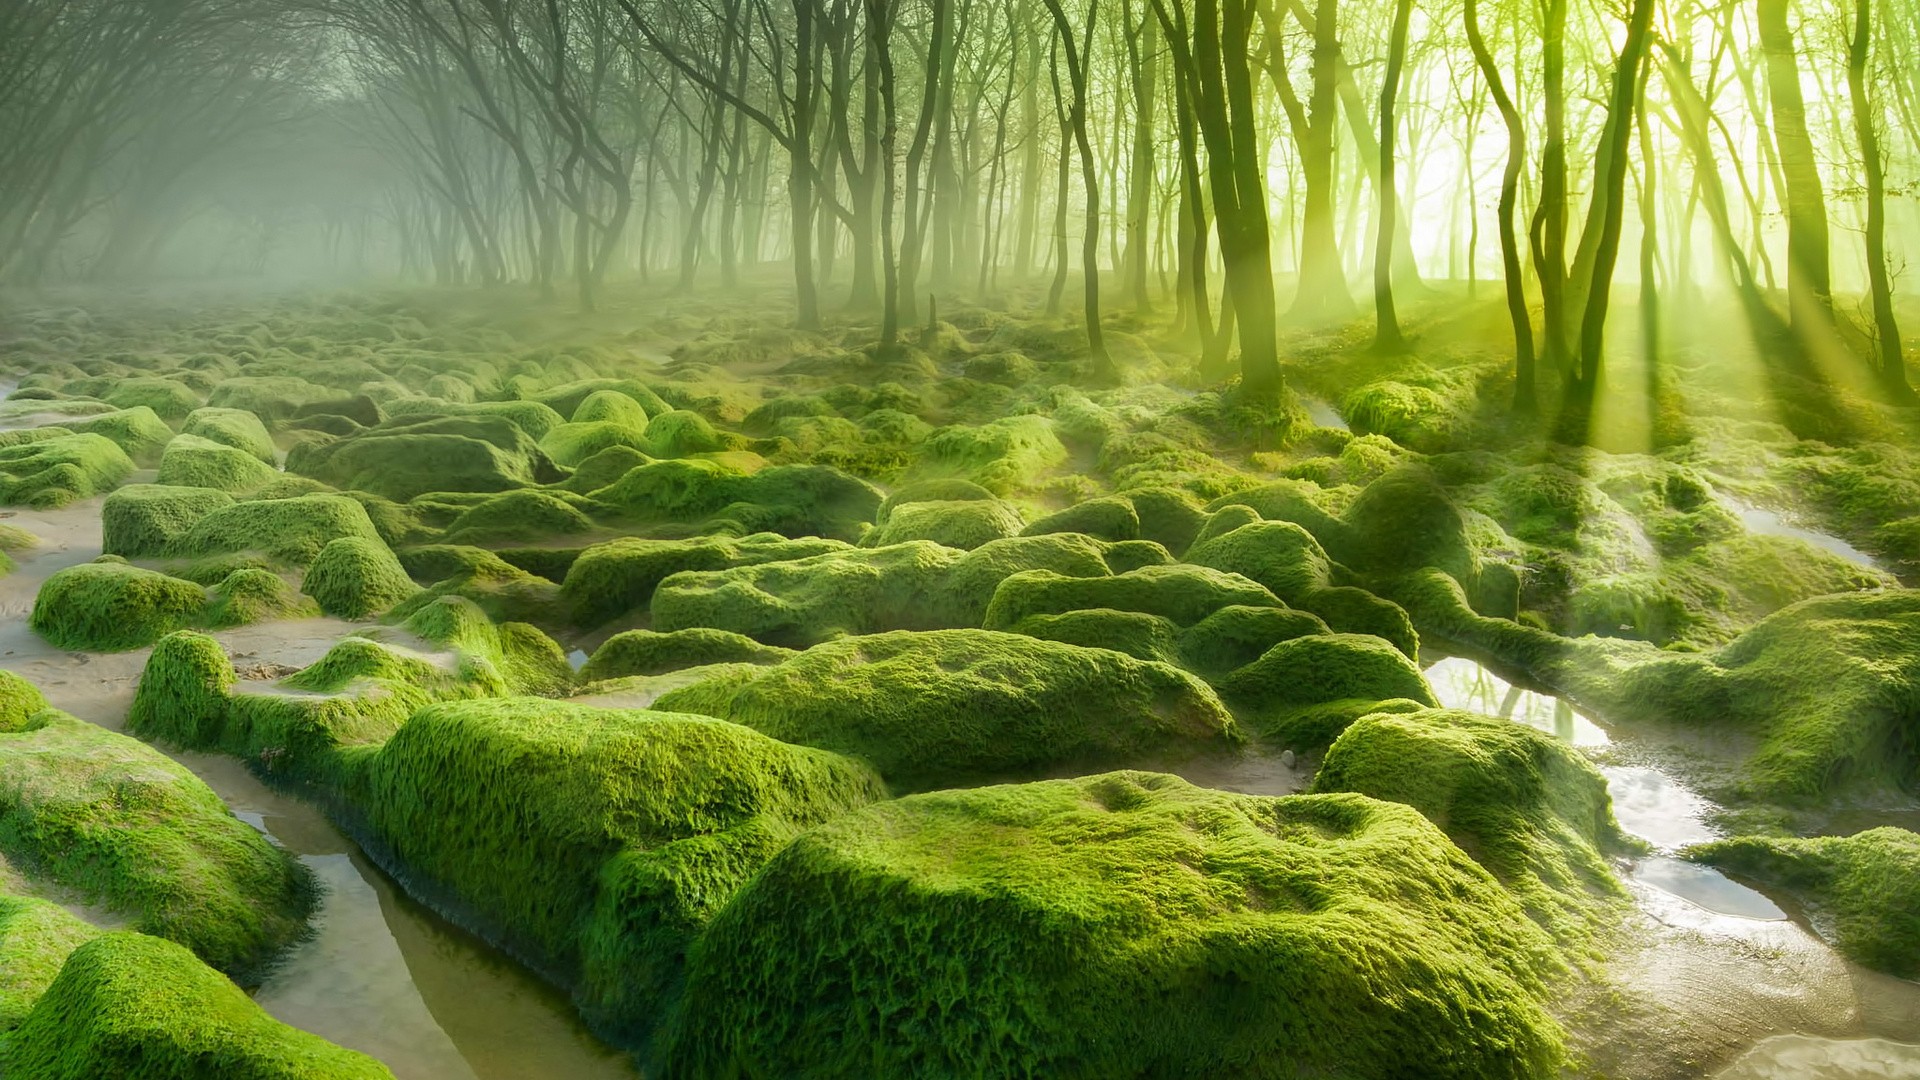 General 1920x1080 landscape nature water trees forest moss mist stones sun rays morning green